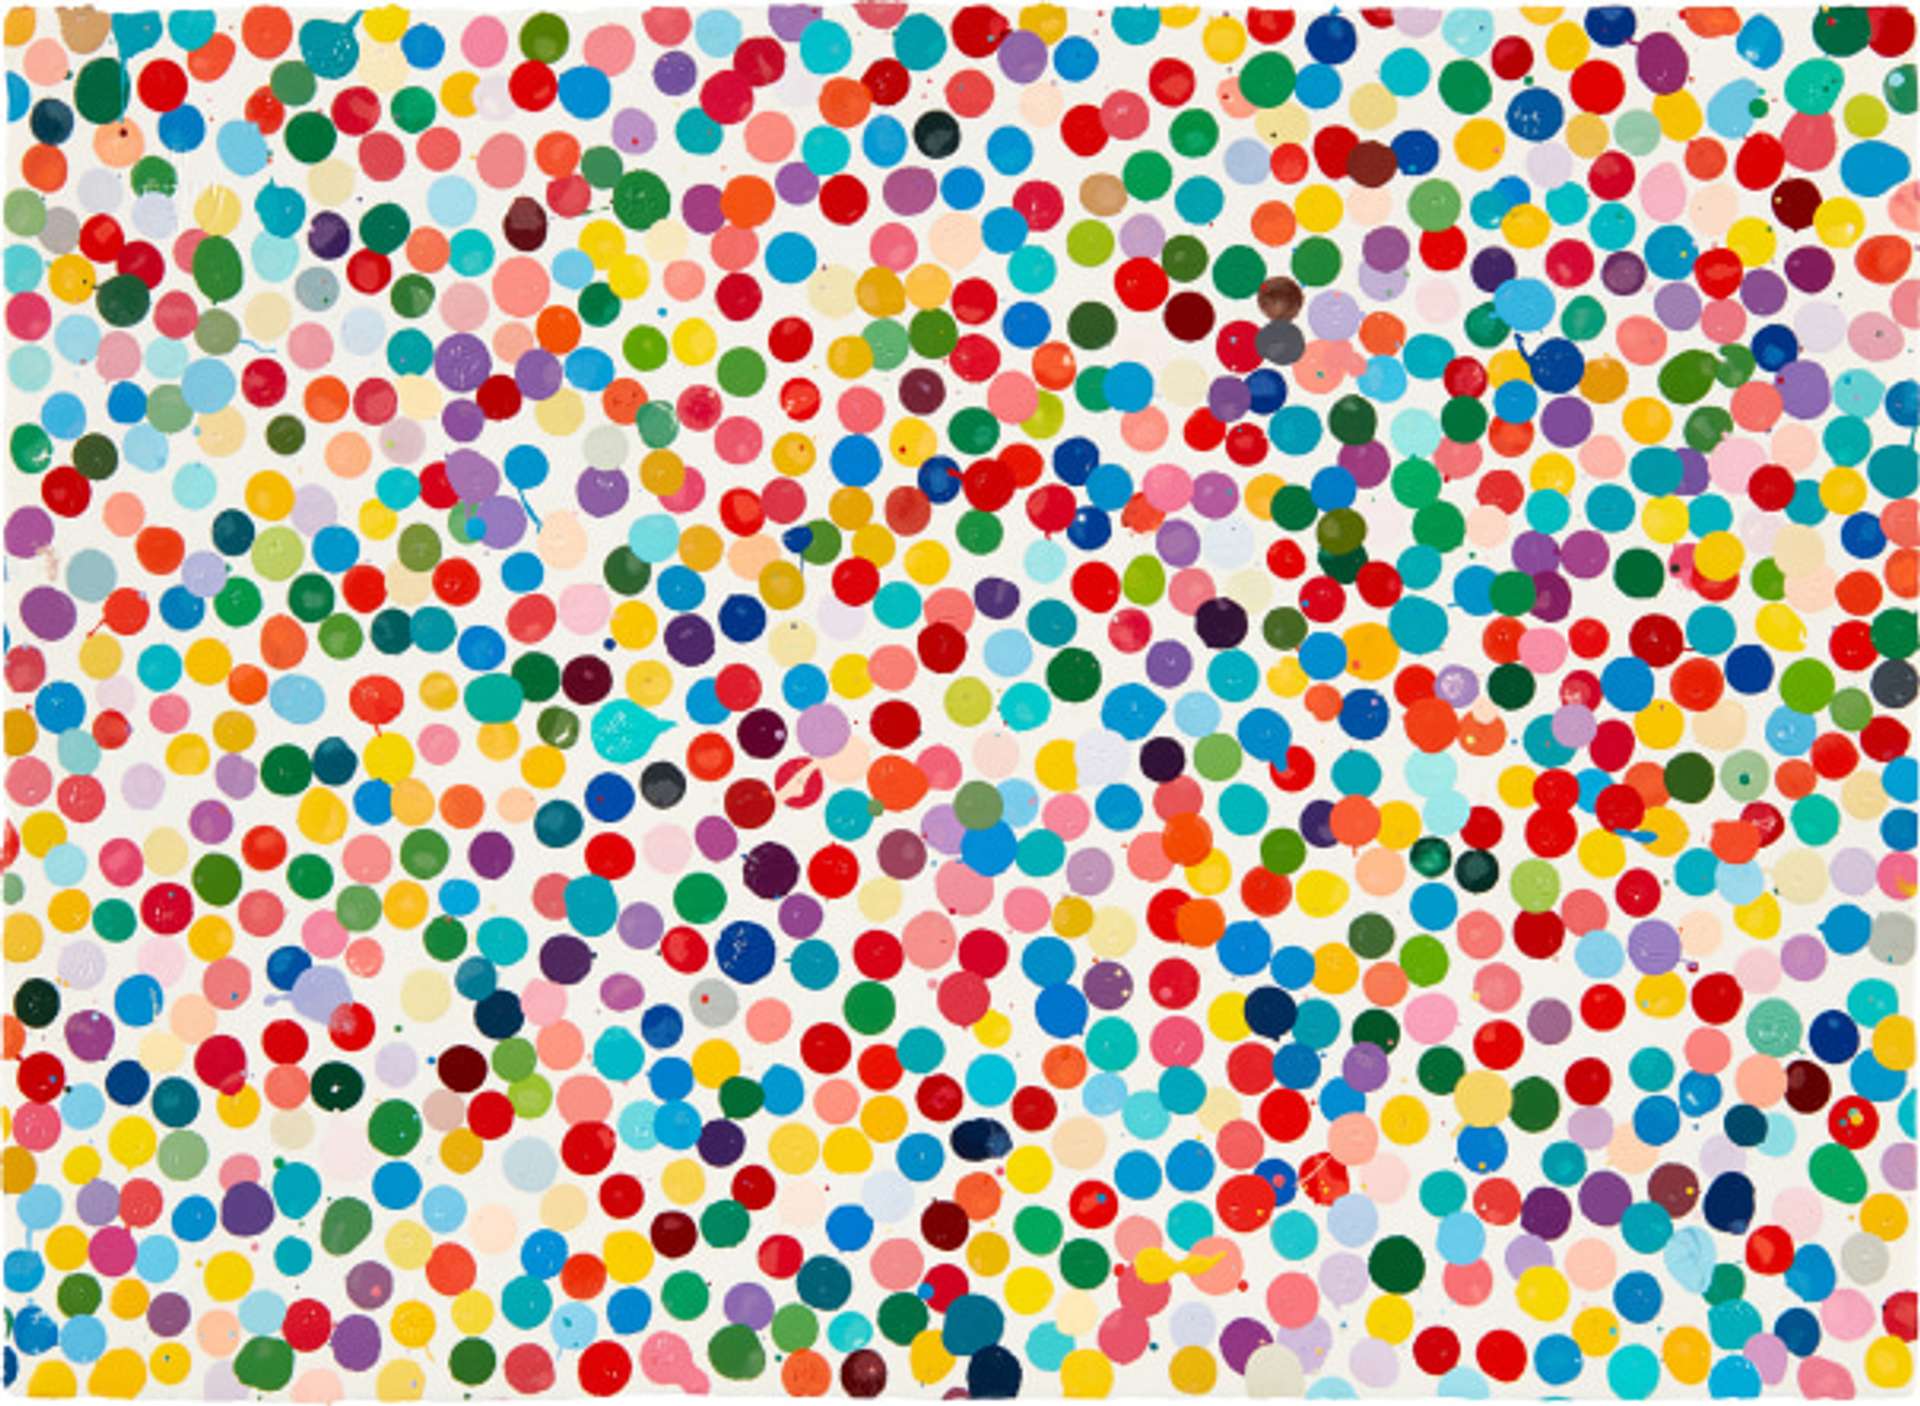 Small multi-coloured dots painted on a white background